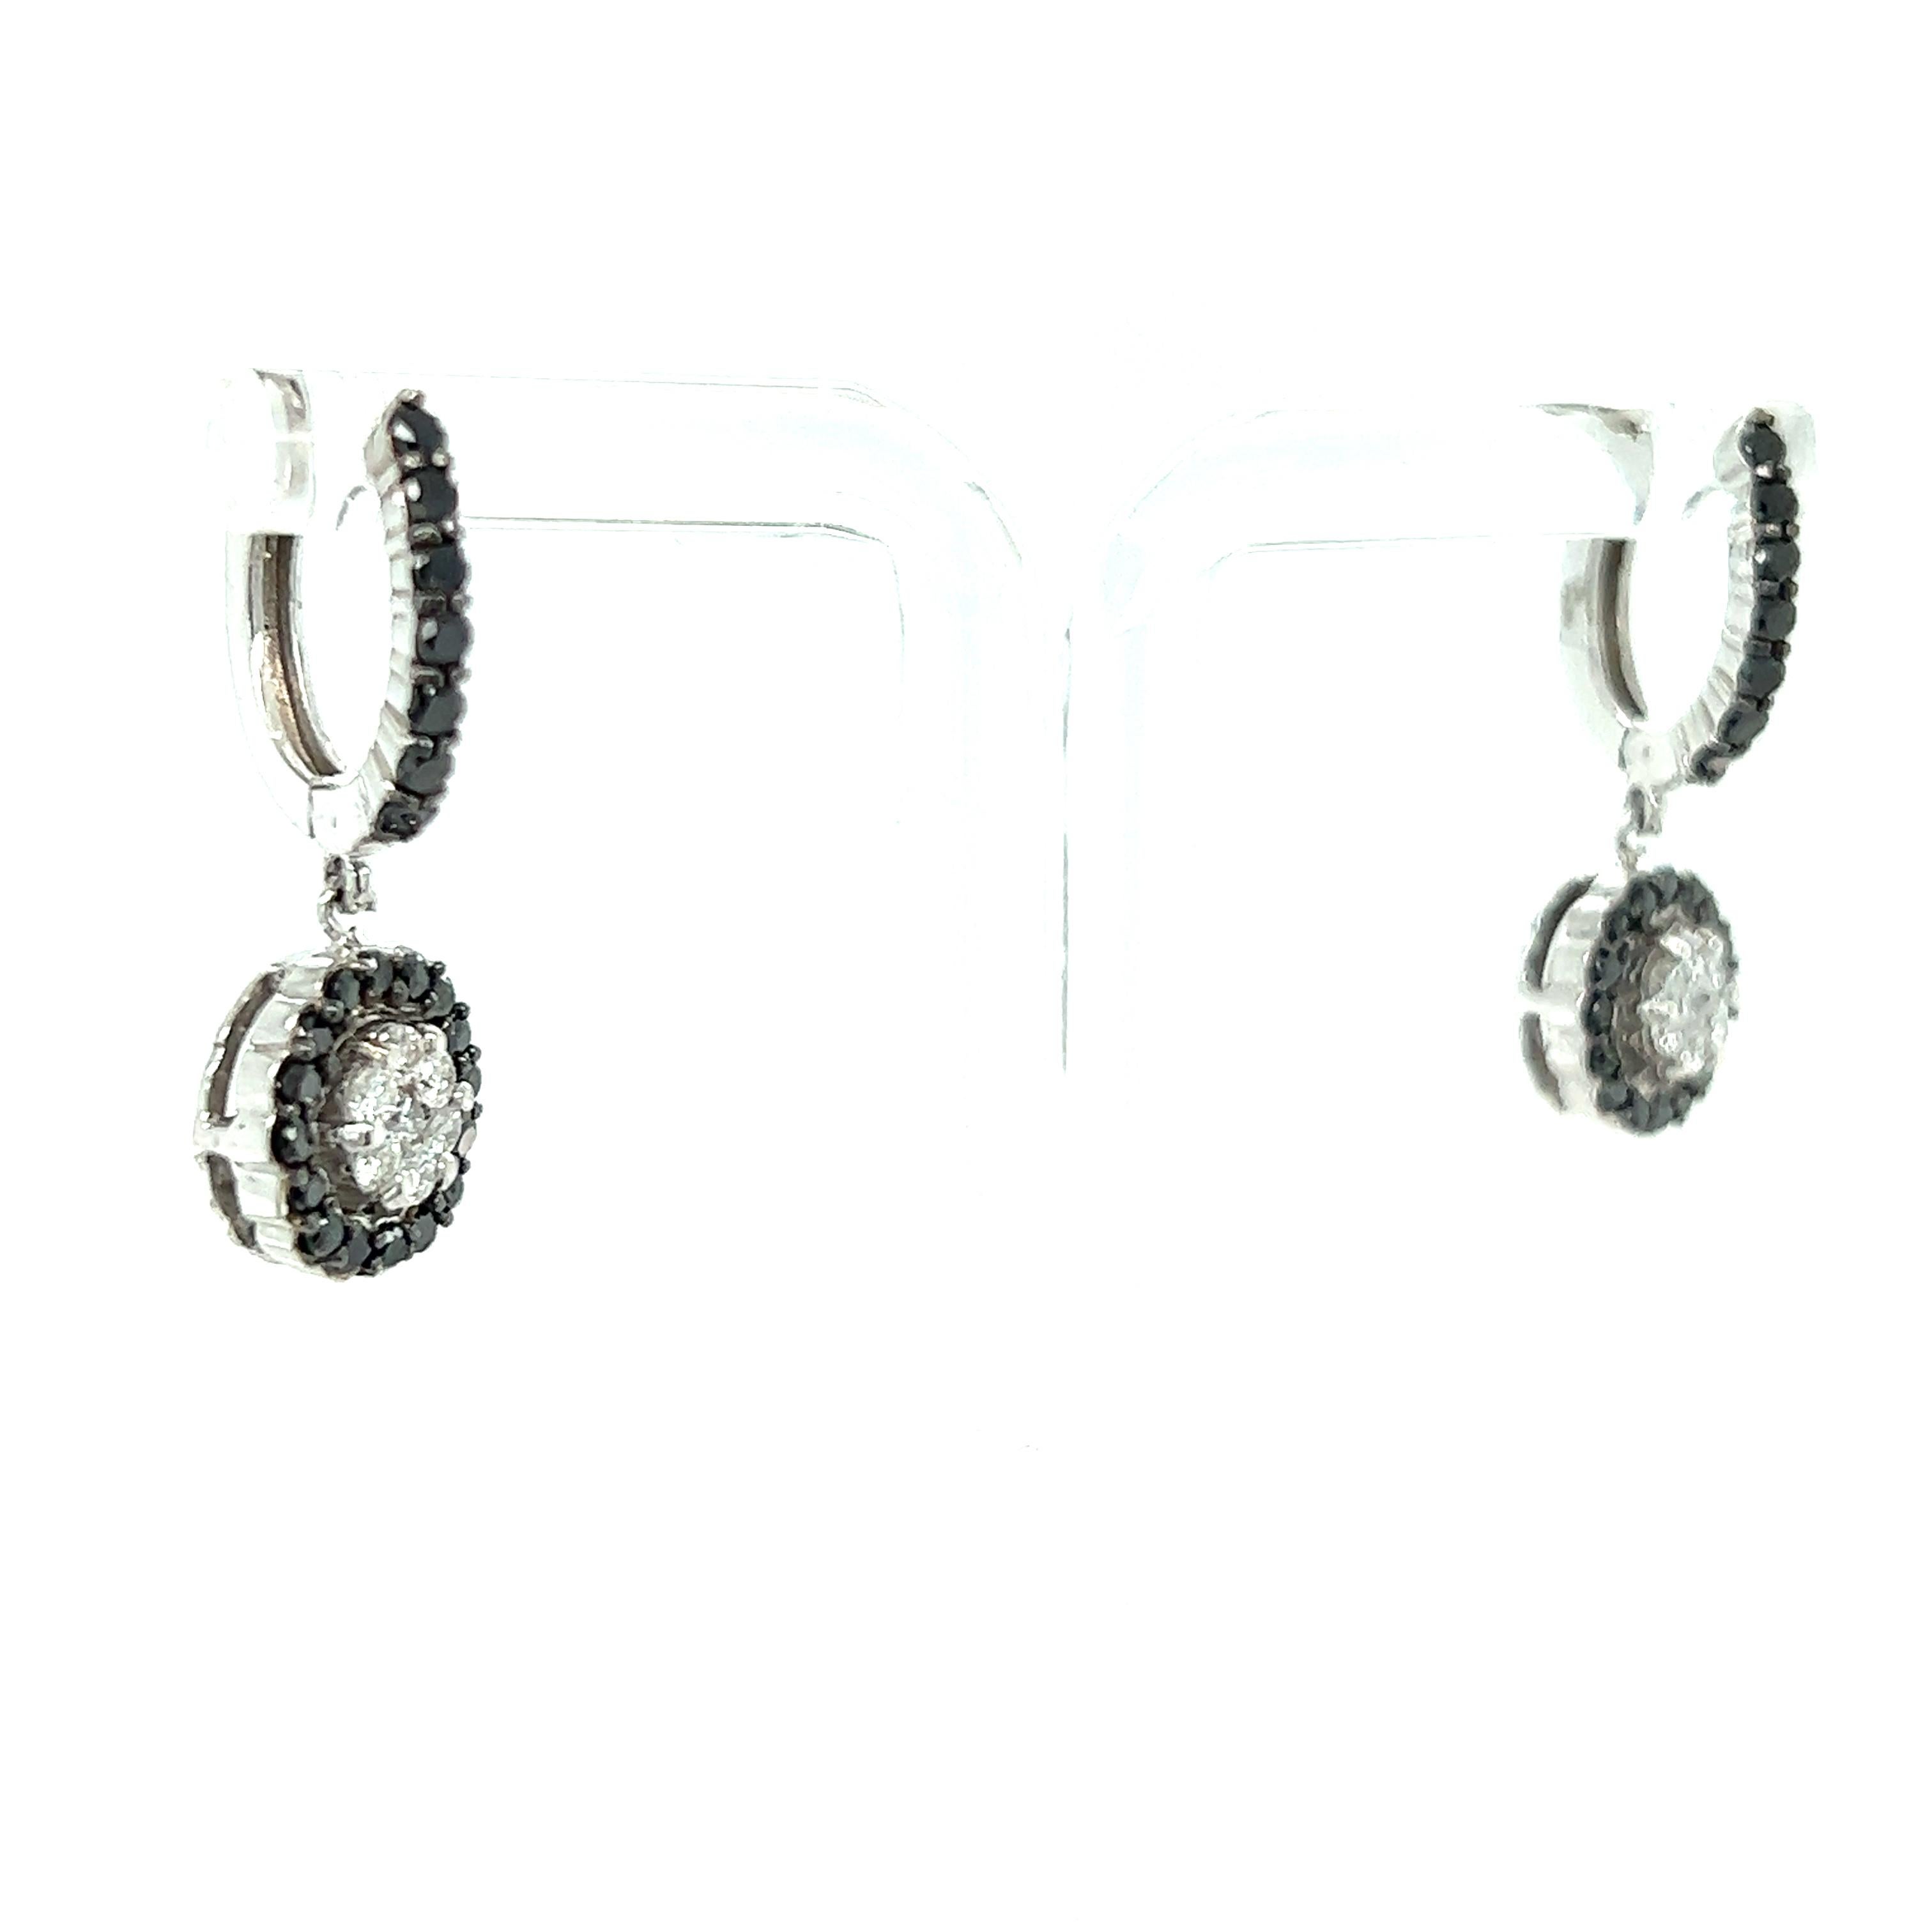 These earrings have Natural Black Round Cut Diamonds that weigh 0.85 Carats and Natural Round Cut White Diamonds that weigh 0.42 Carats. The total carat weight of the earrings are 1.27 Carats. The clarity and color of the white diamonds are